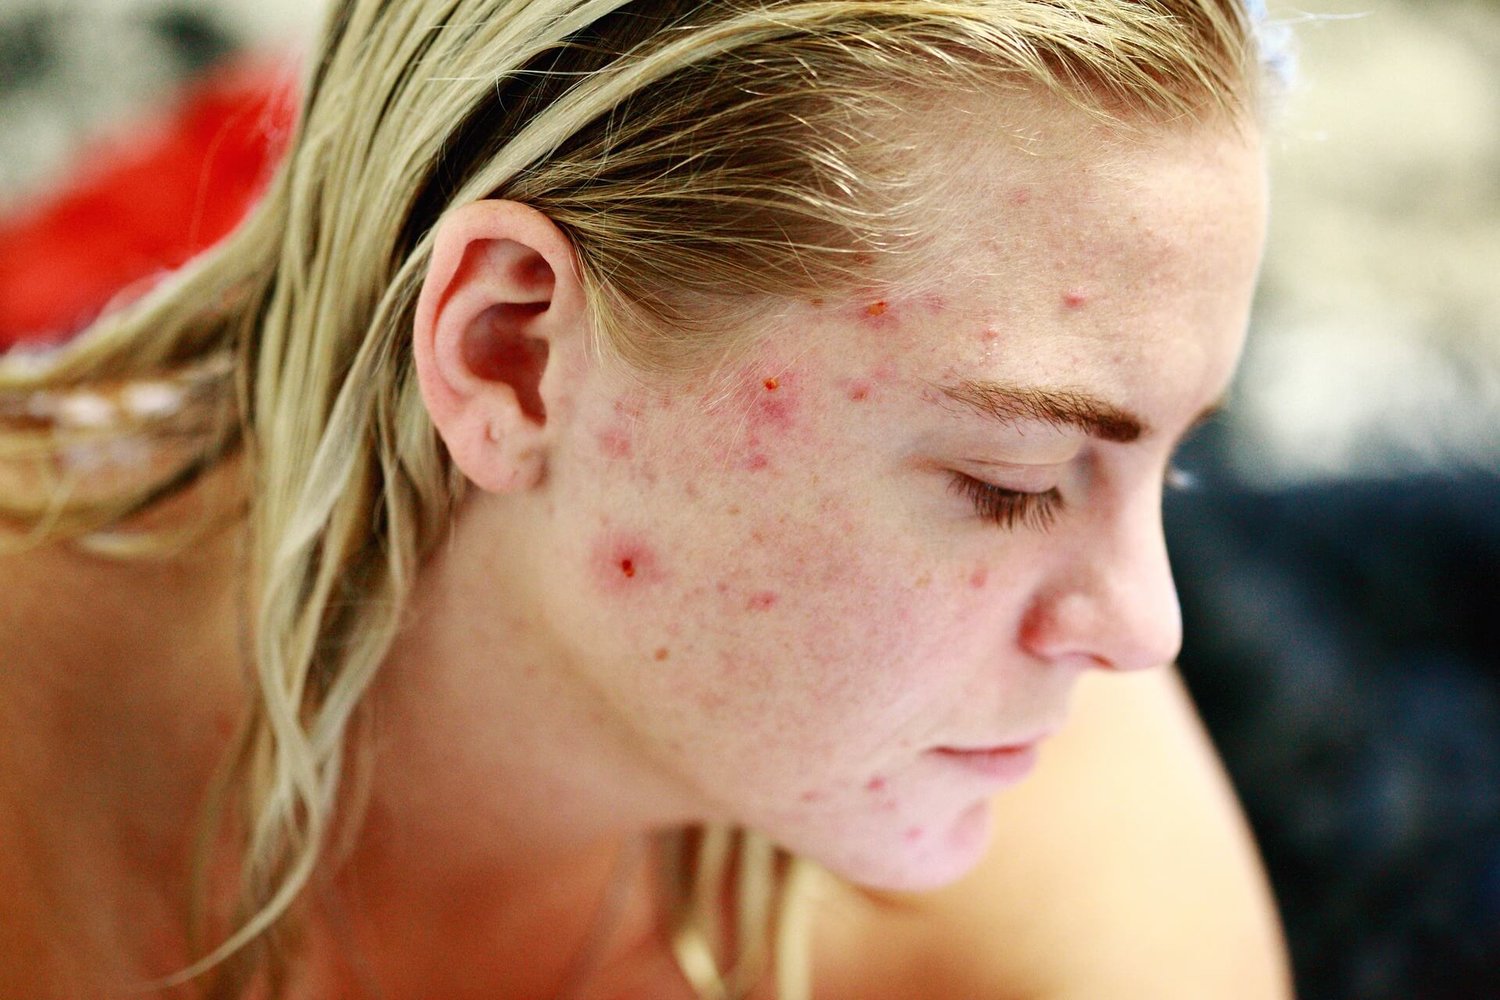 The reason your acne isn't getting better